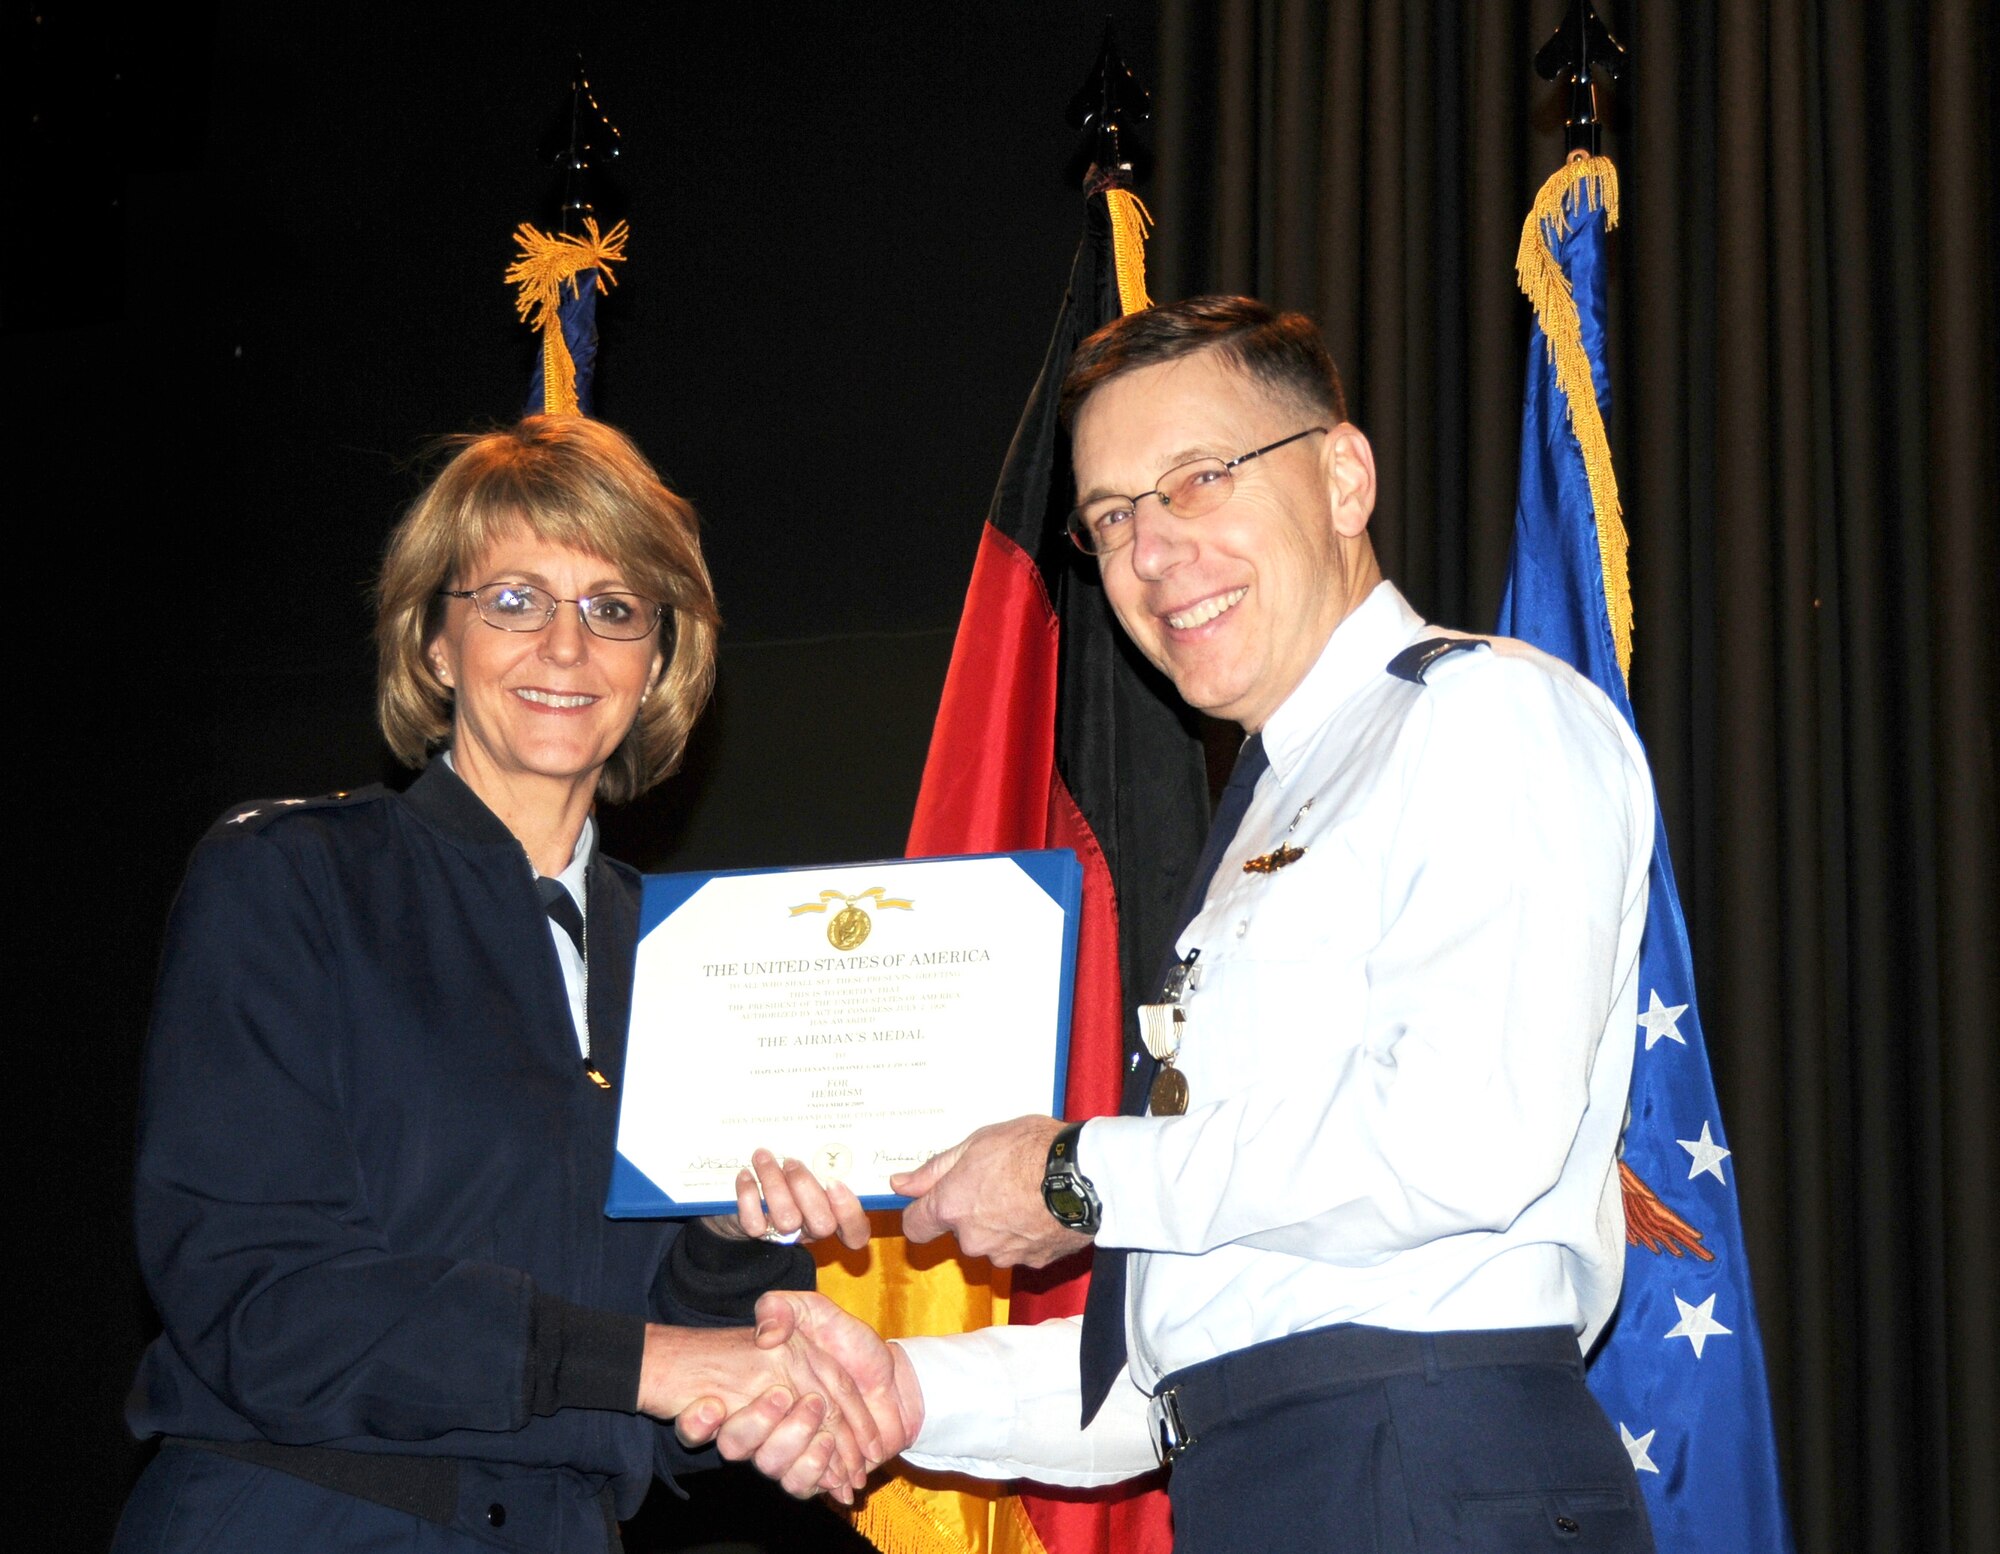 RAMSTEIN AIR BASE, Germany – 17th Air Force Commander Maj. Gen. Margaret Woodward presents the Airman’s Medal to 17th’s Command Chaplain (Lt. Col.) Gary Ziccardi Nov. 29 at a commander’s call. Zicarrdi was awarded the medal for rescuing a swimmer that was drowning in November, 2009. (US Air Force photo by Master Sgt. Jim Fisher) 